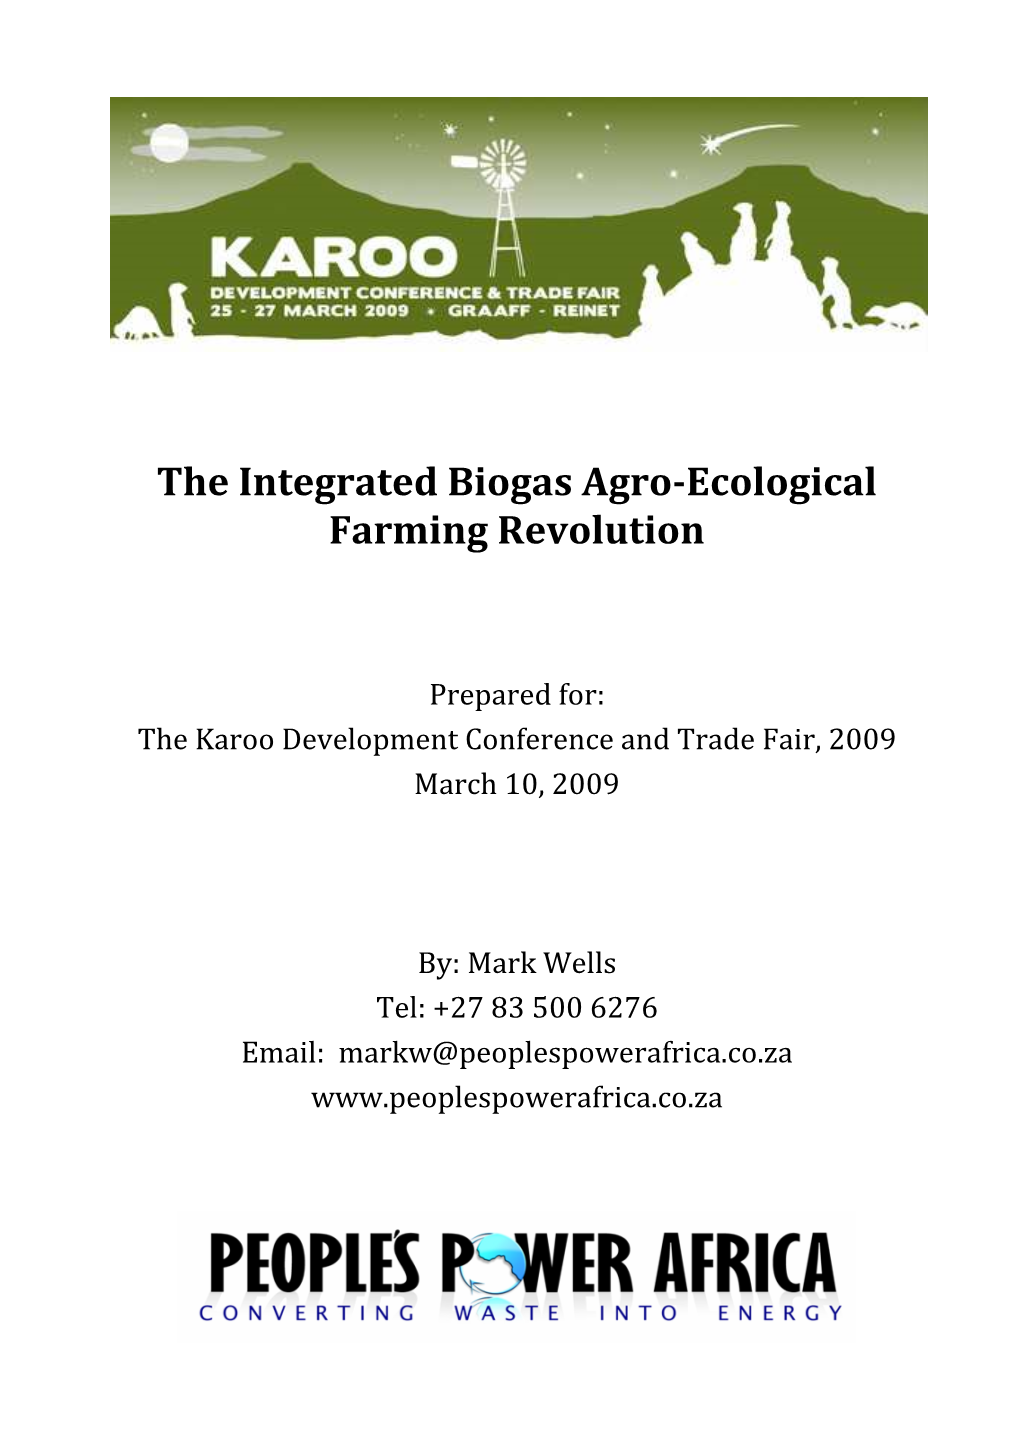 The Integrated Biogas Agro-Ecological Farming Revolution